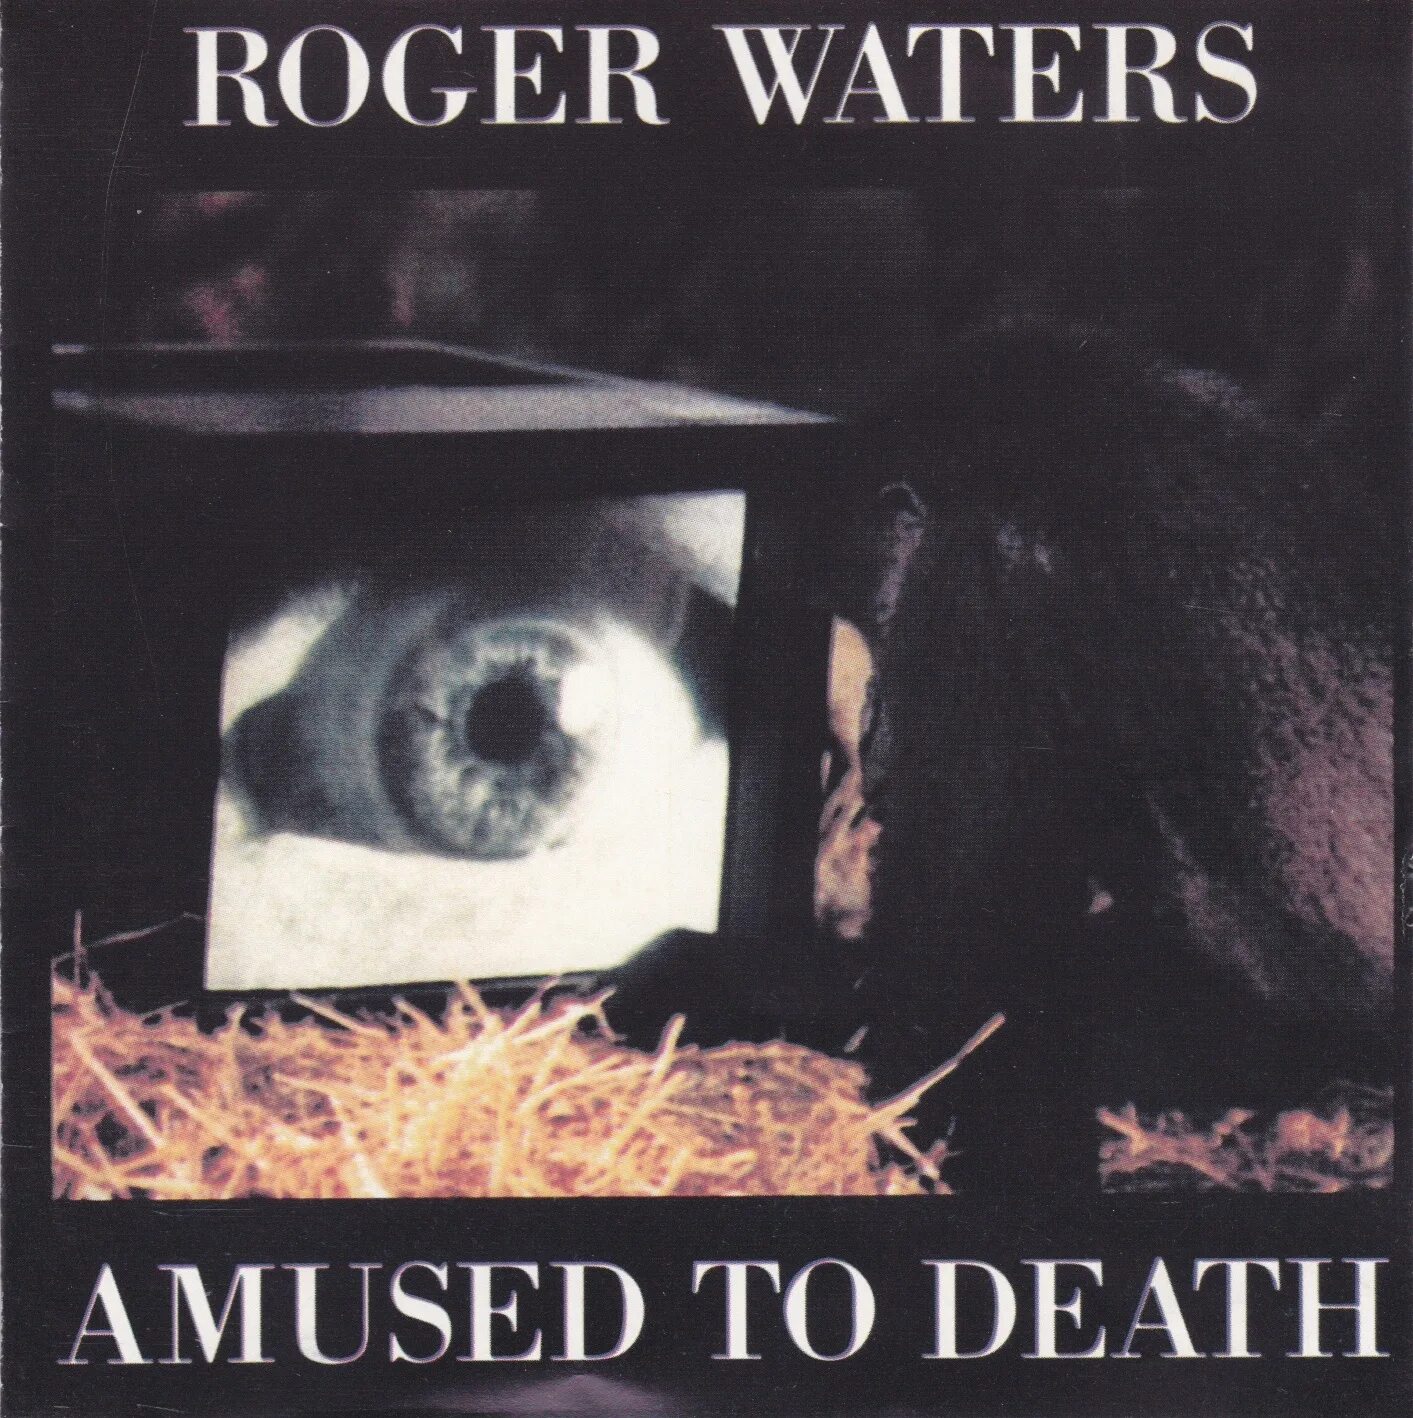 Amused to death. Roger Waters amused to Death 1992. Amused to Death Роджер Уотерс. Amused to Death Роджер Уотерс обложка. Roger Waters - amused to Death 1992 обложка альбома.